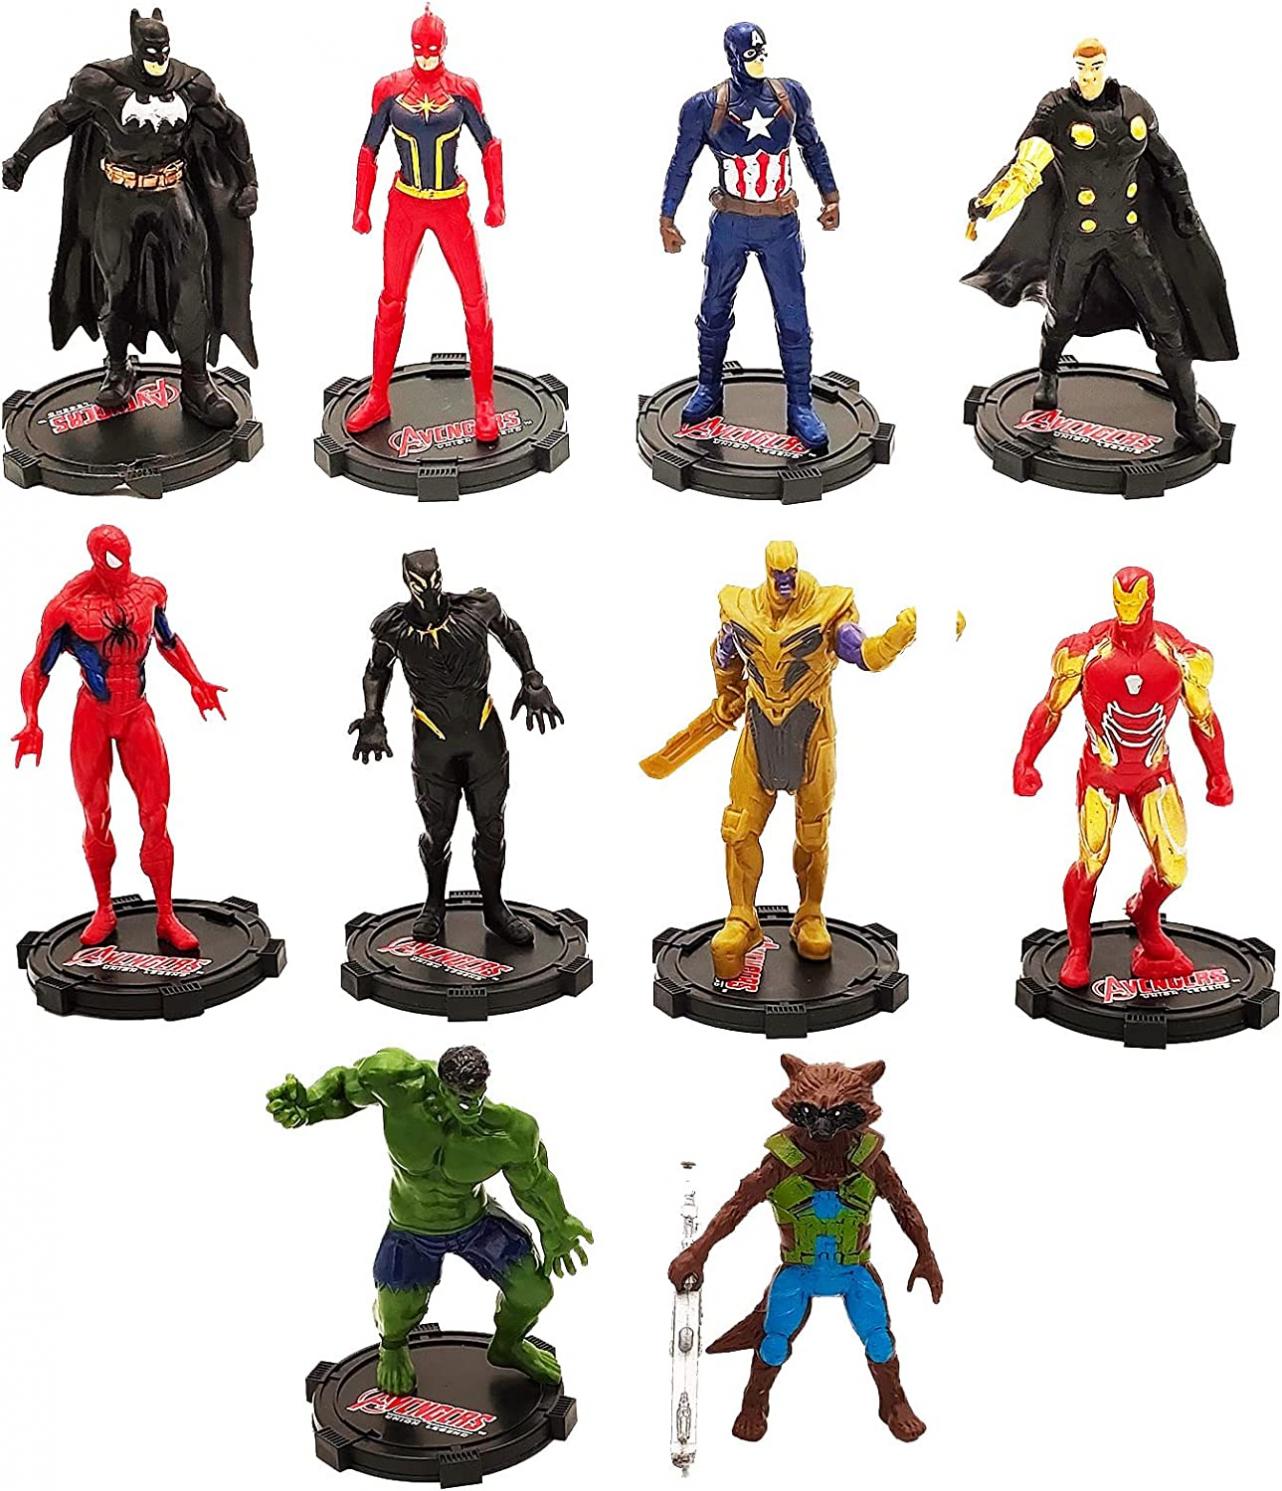 4inch Superhero Figure Set-10pcs Super Hero Adventures Ultimate Toddler Toys Small Action Figurines Cake Decoration Kids Gifts Collectible Figures (Exclusive Amazon)